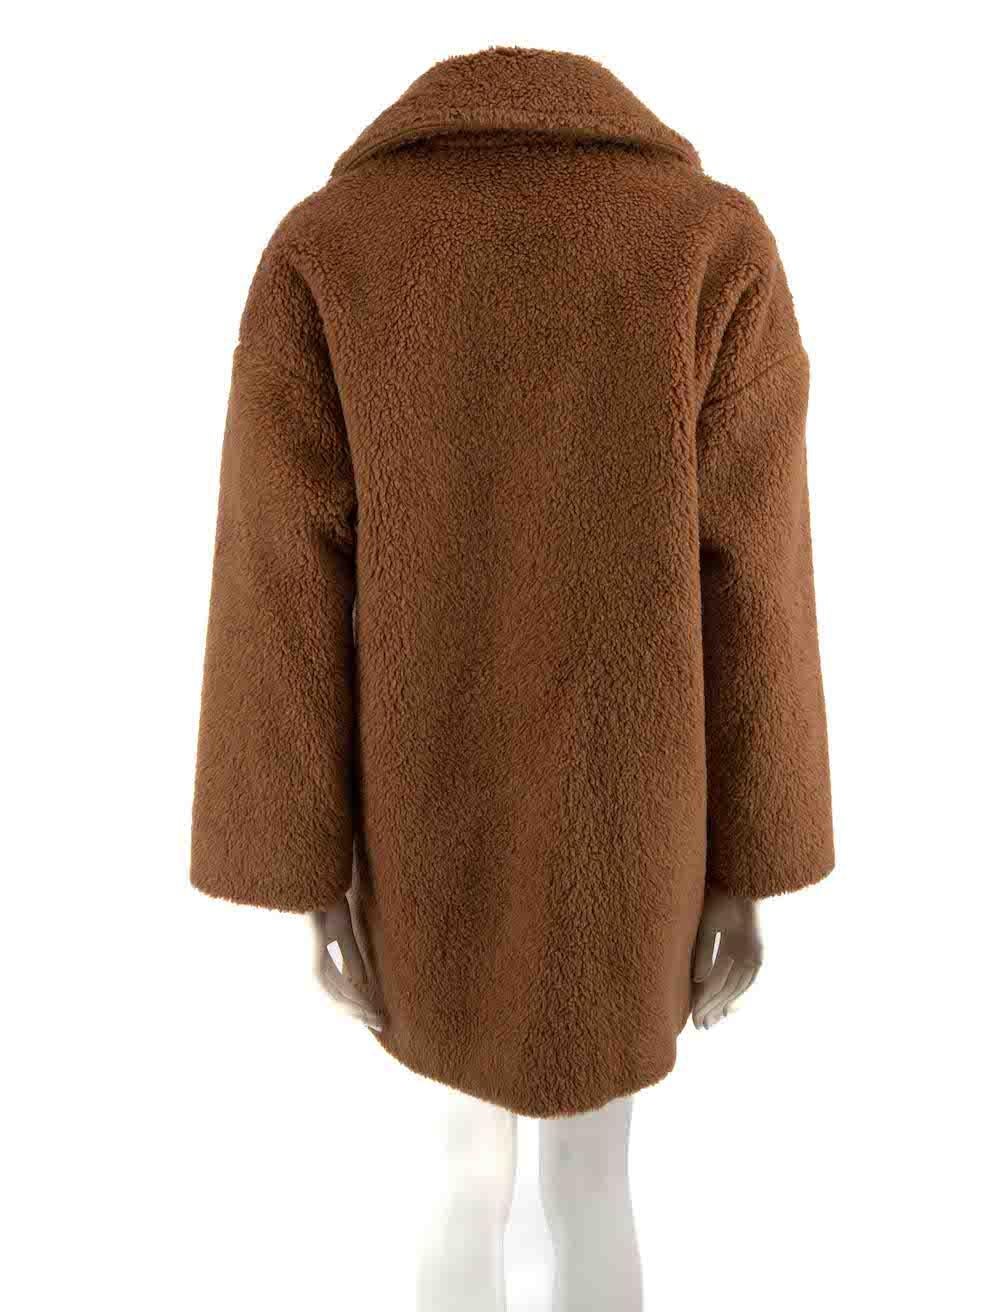 Max Mara Weekend Max Mara Brown Wool Teddy Coat Size S In Good Condition For Sale In London, GB